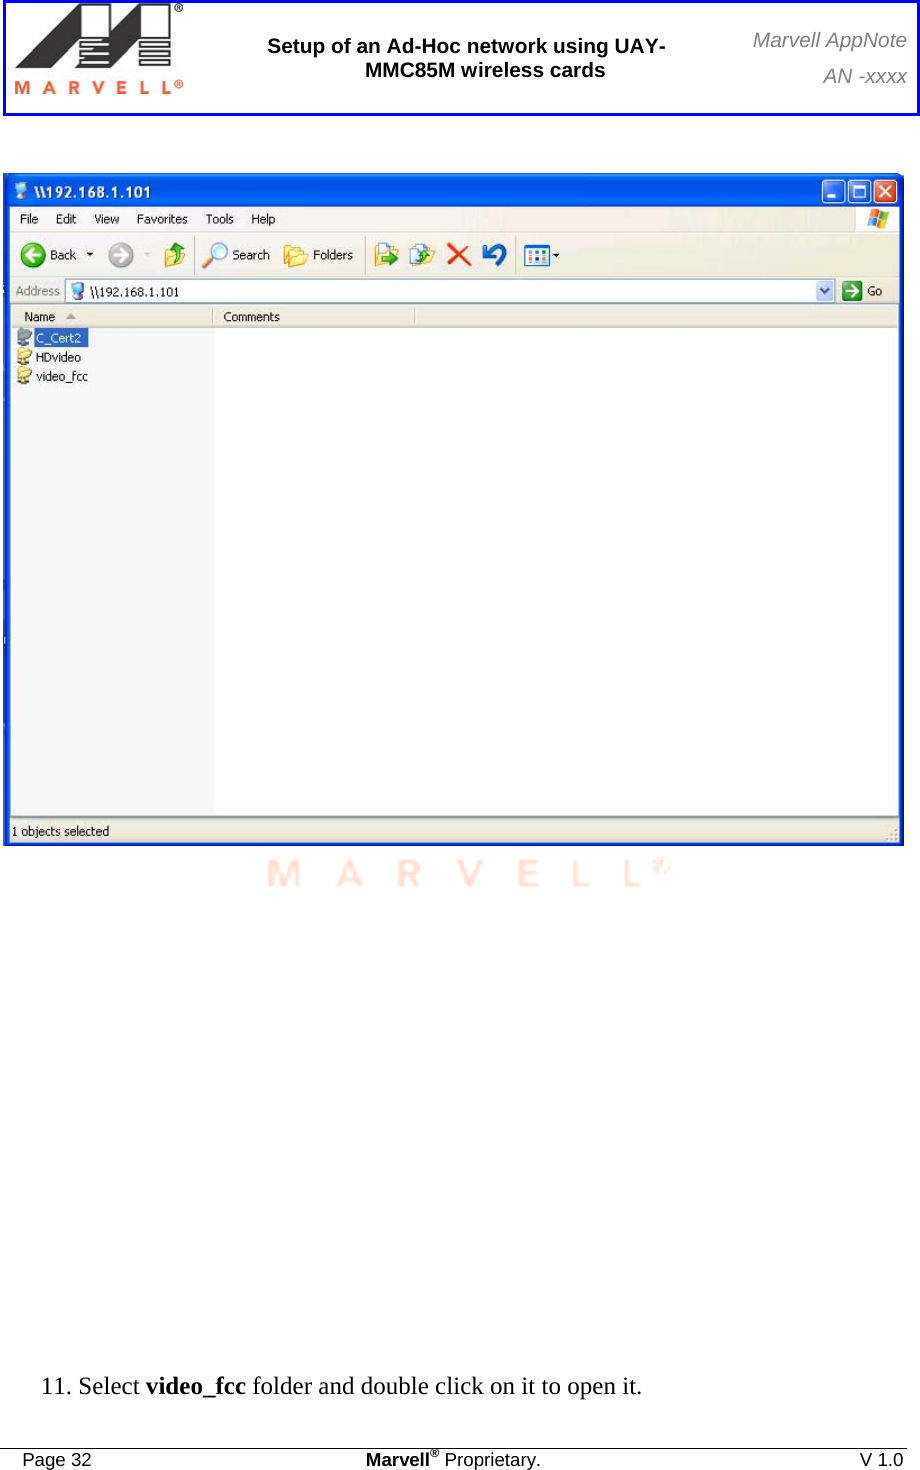  Setup of an Ad-Hoc network using UAY-MMC85M wireless cards Marvell AppNoteAN -xxxx  Page 32  Marvell® Proprietary.  V 1.0                     11. Select video_fcc folder and double click on it to open it.  